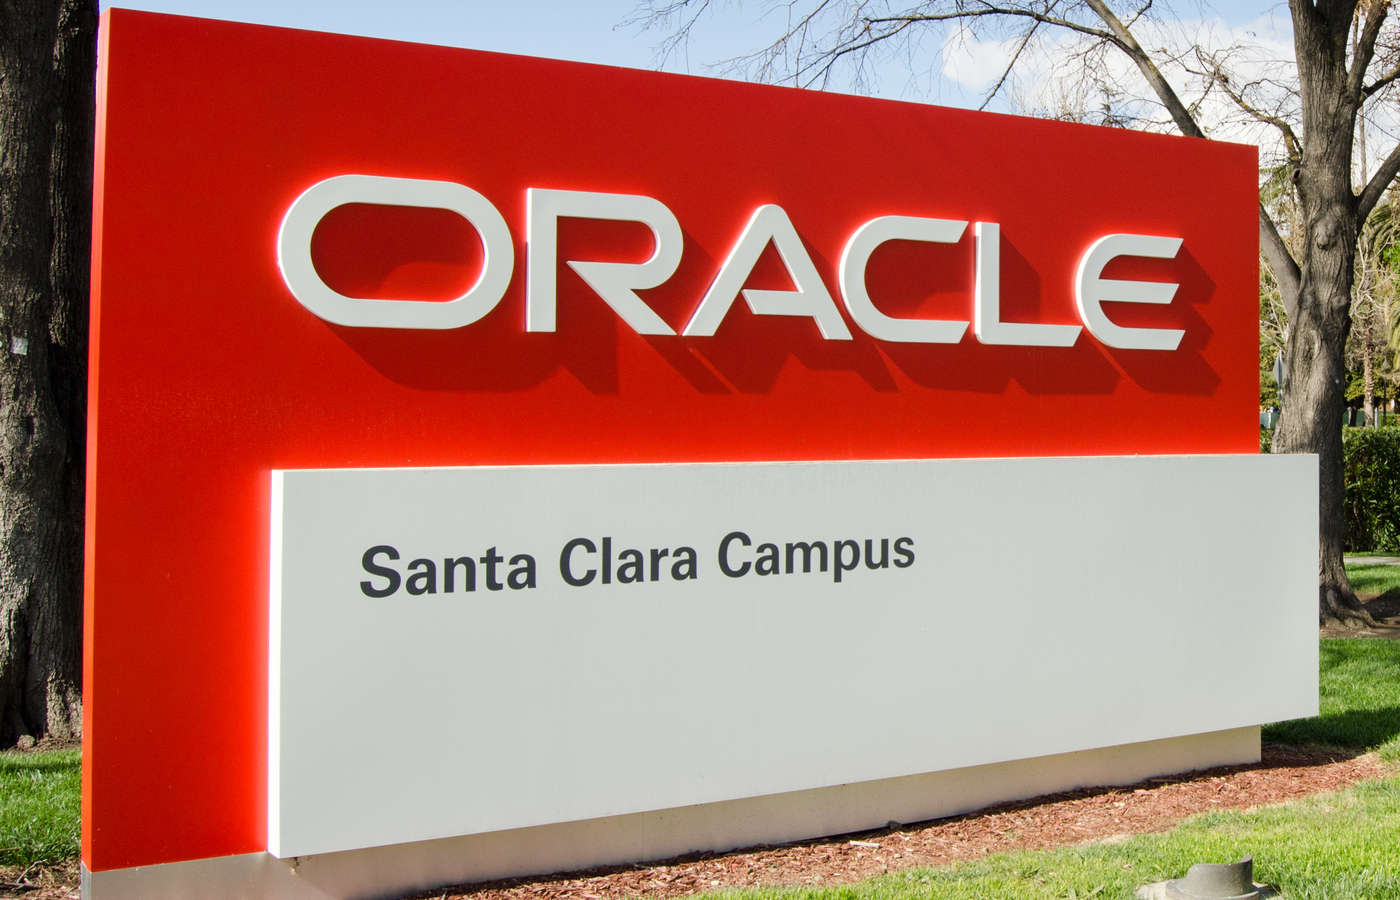 Oracle gains as cloud infrastructure business gets AI boost